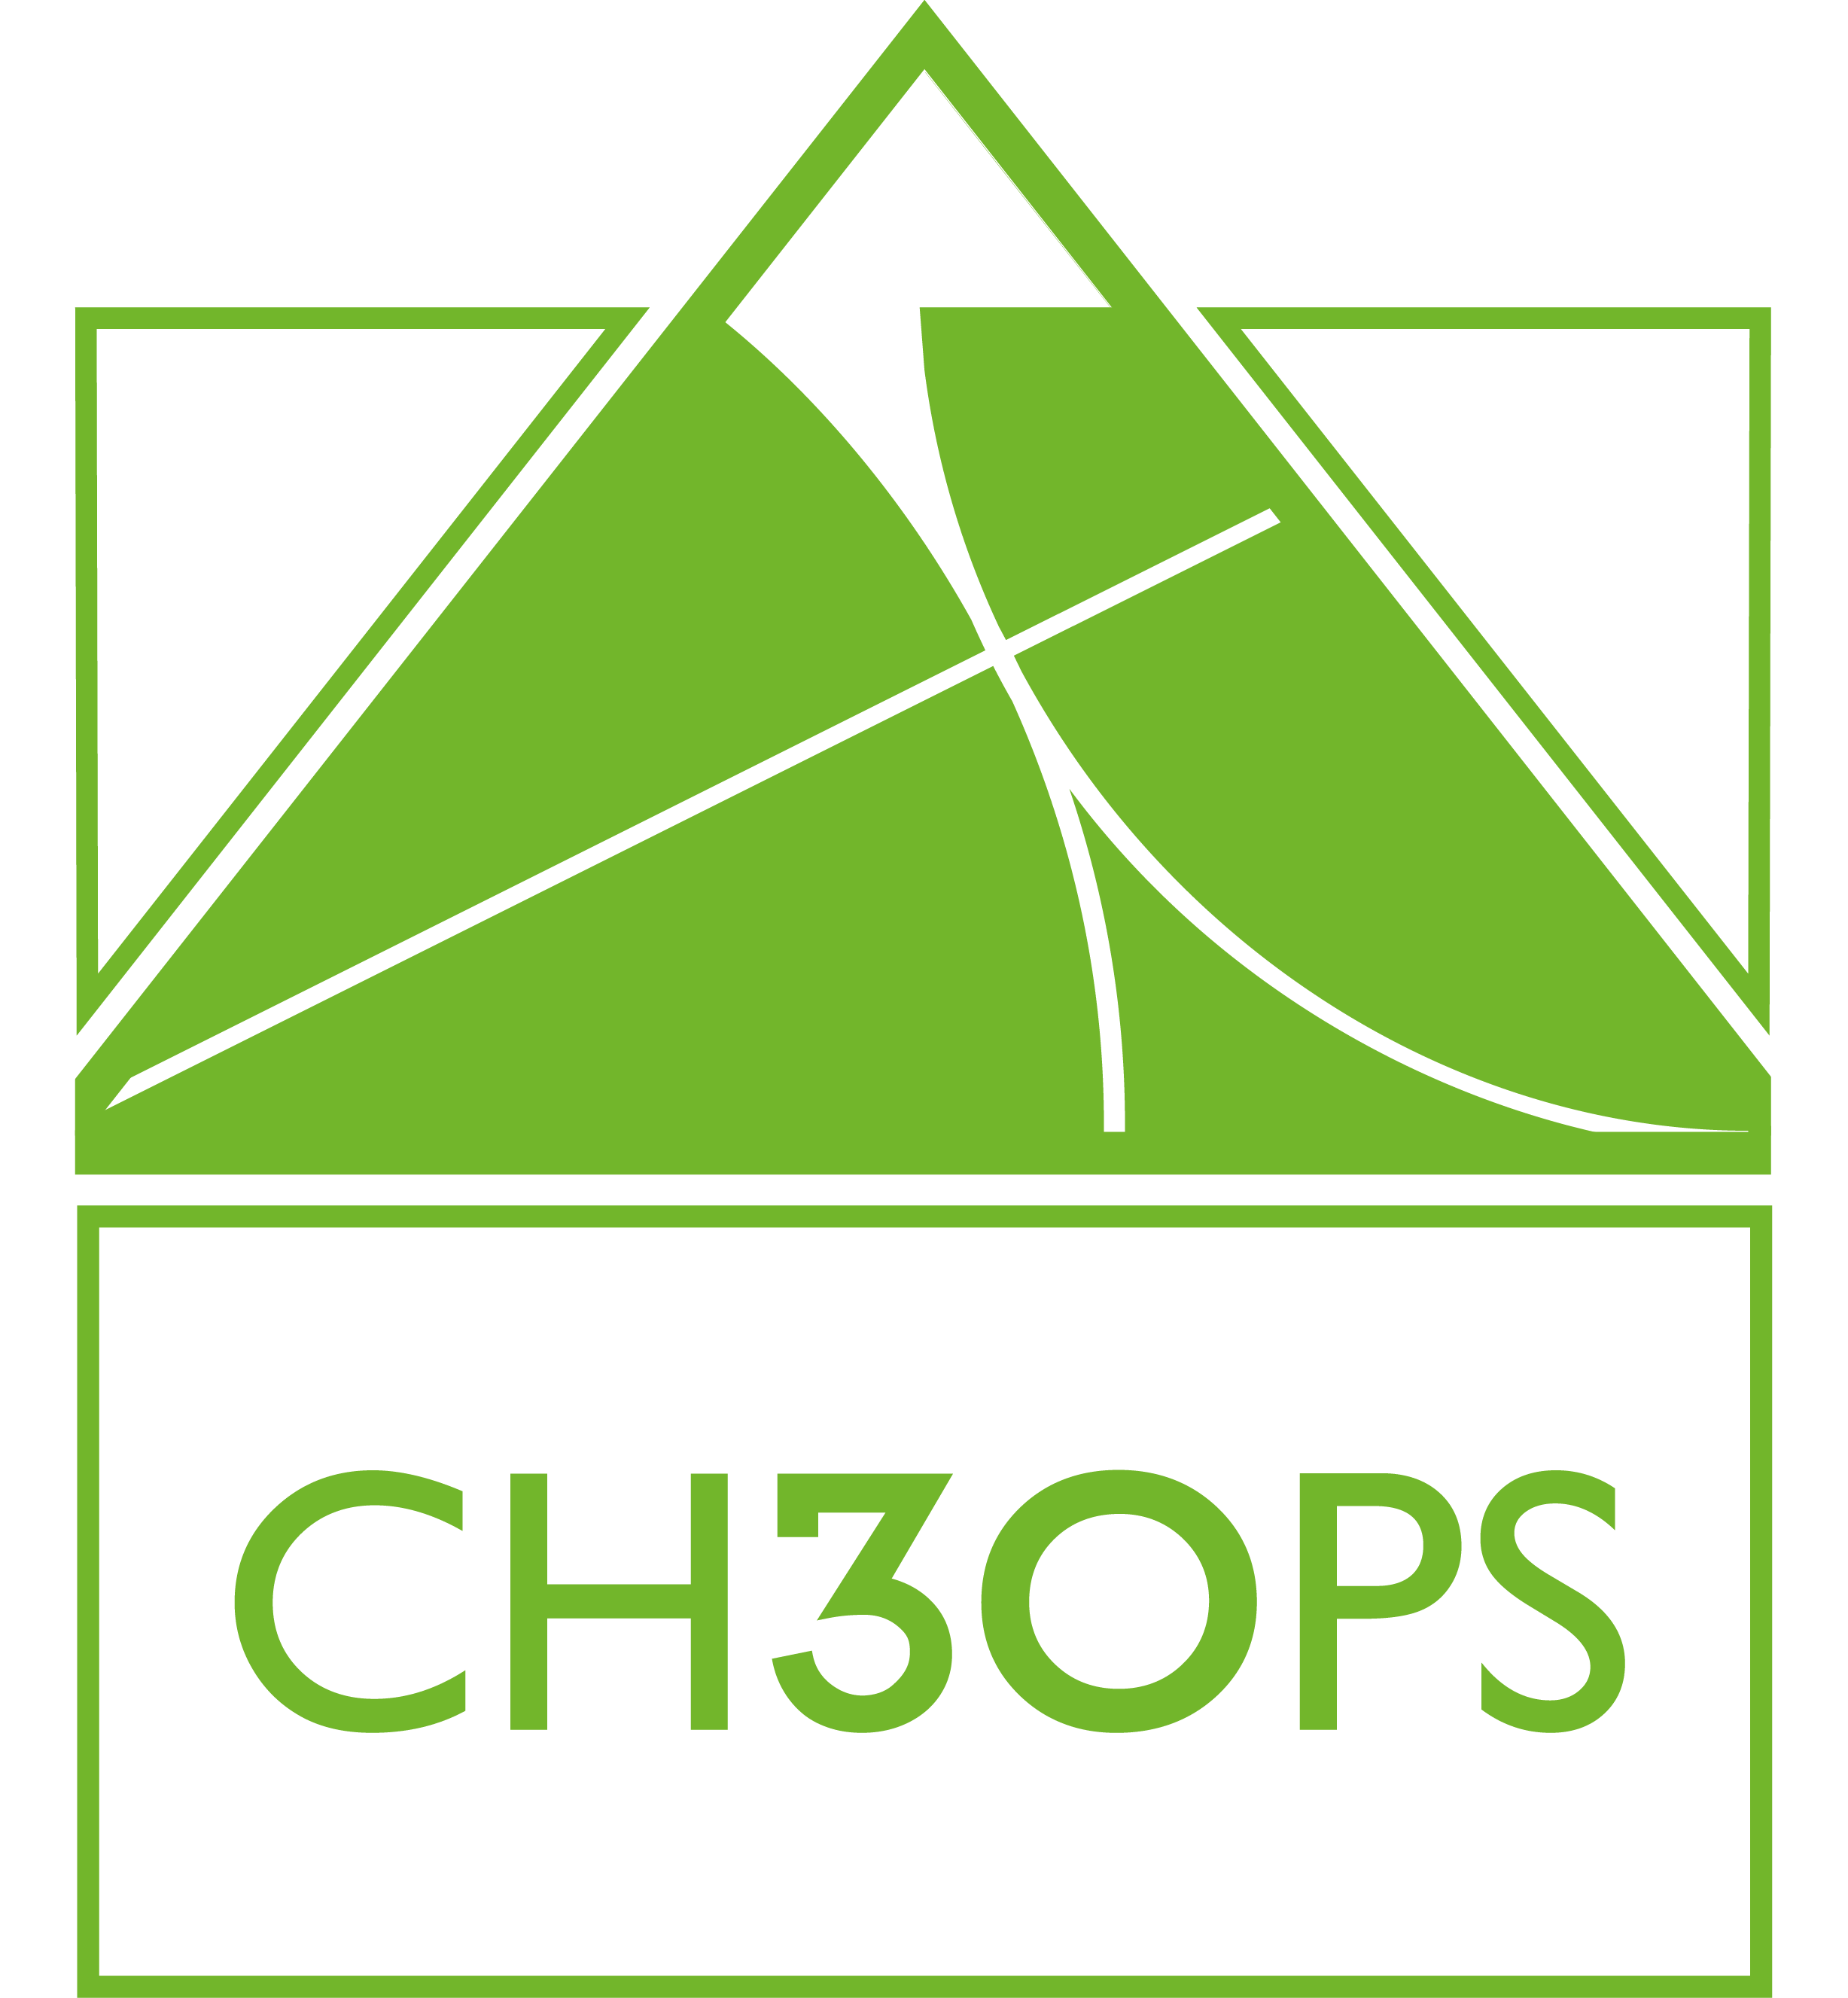 Upside Down Green Triangle Logo - CHEOPS | Lustrum Drink - CHEOPS